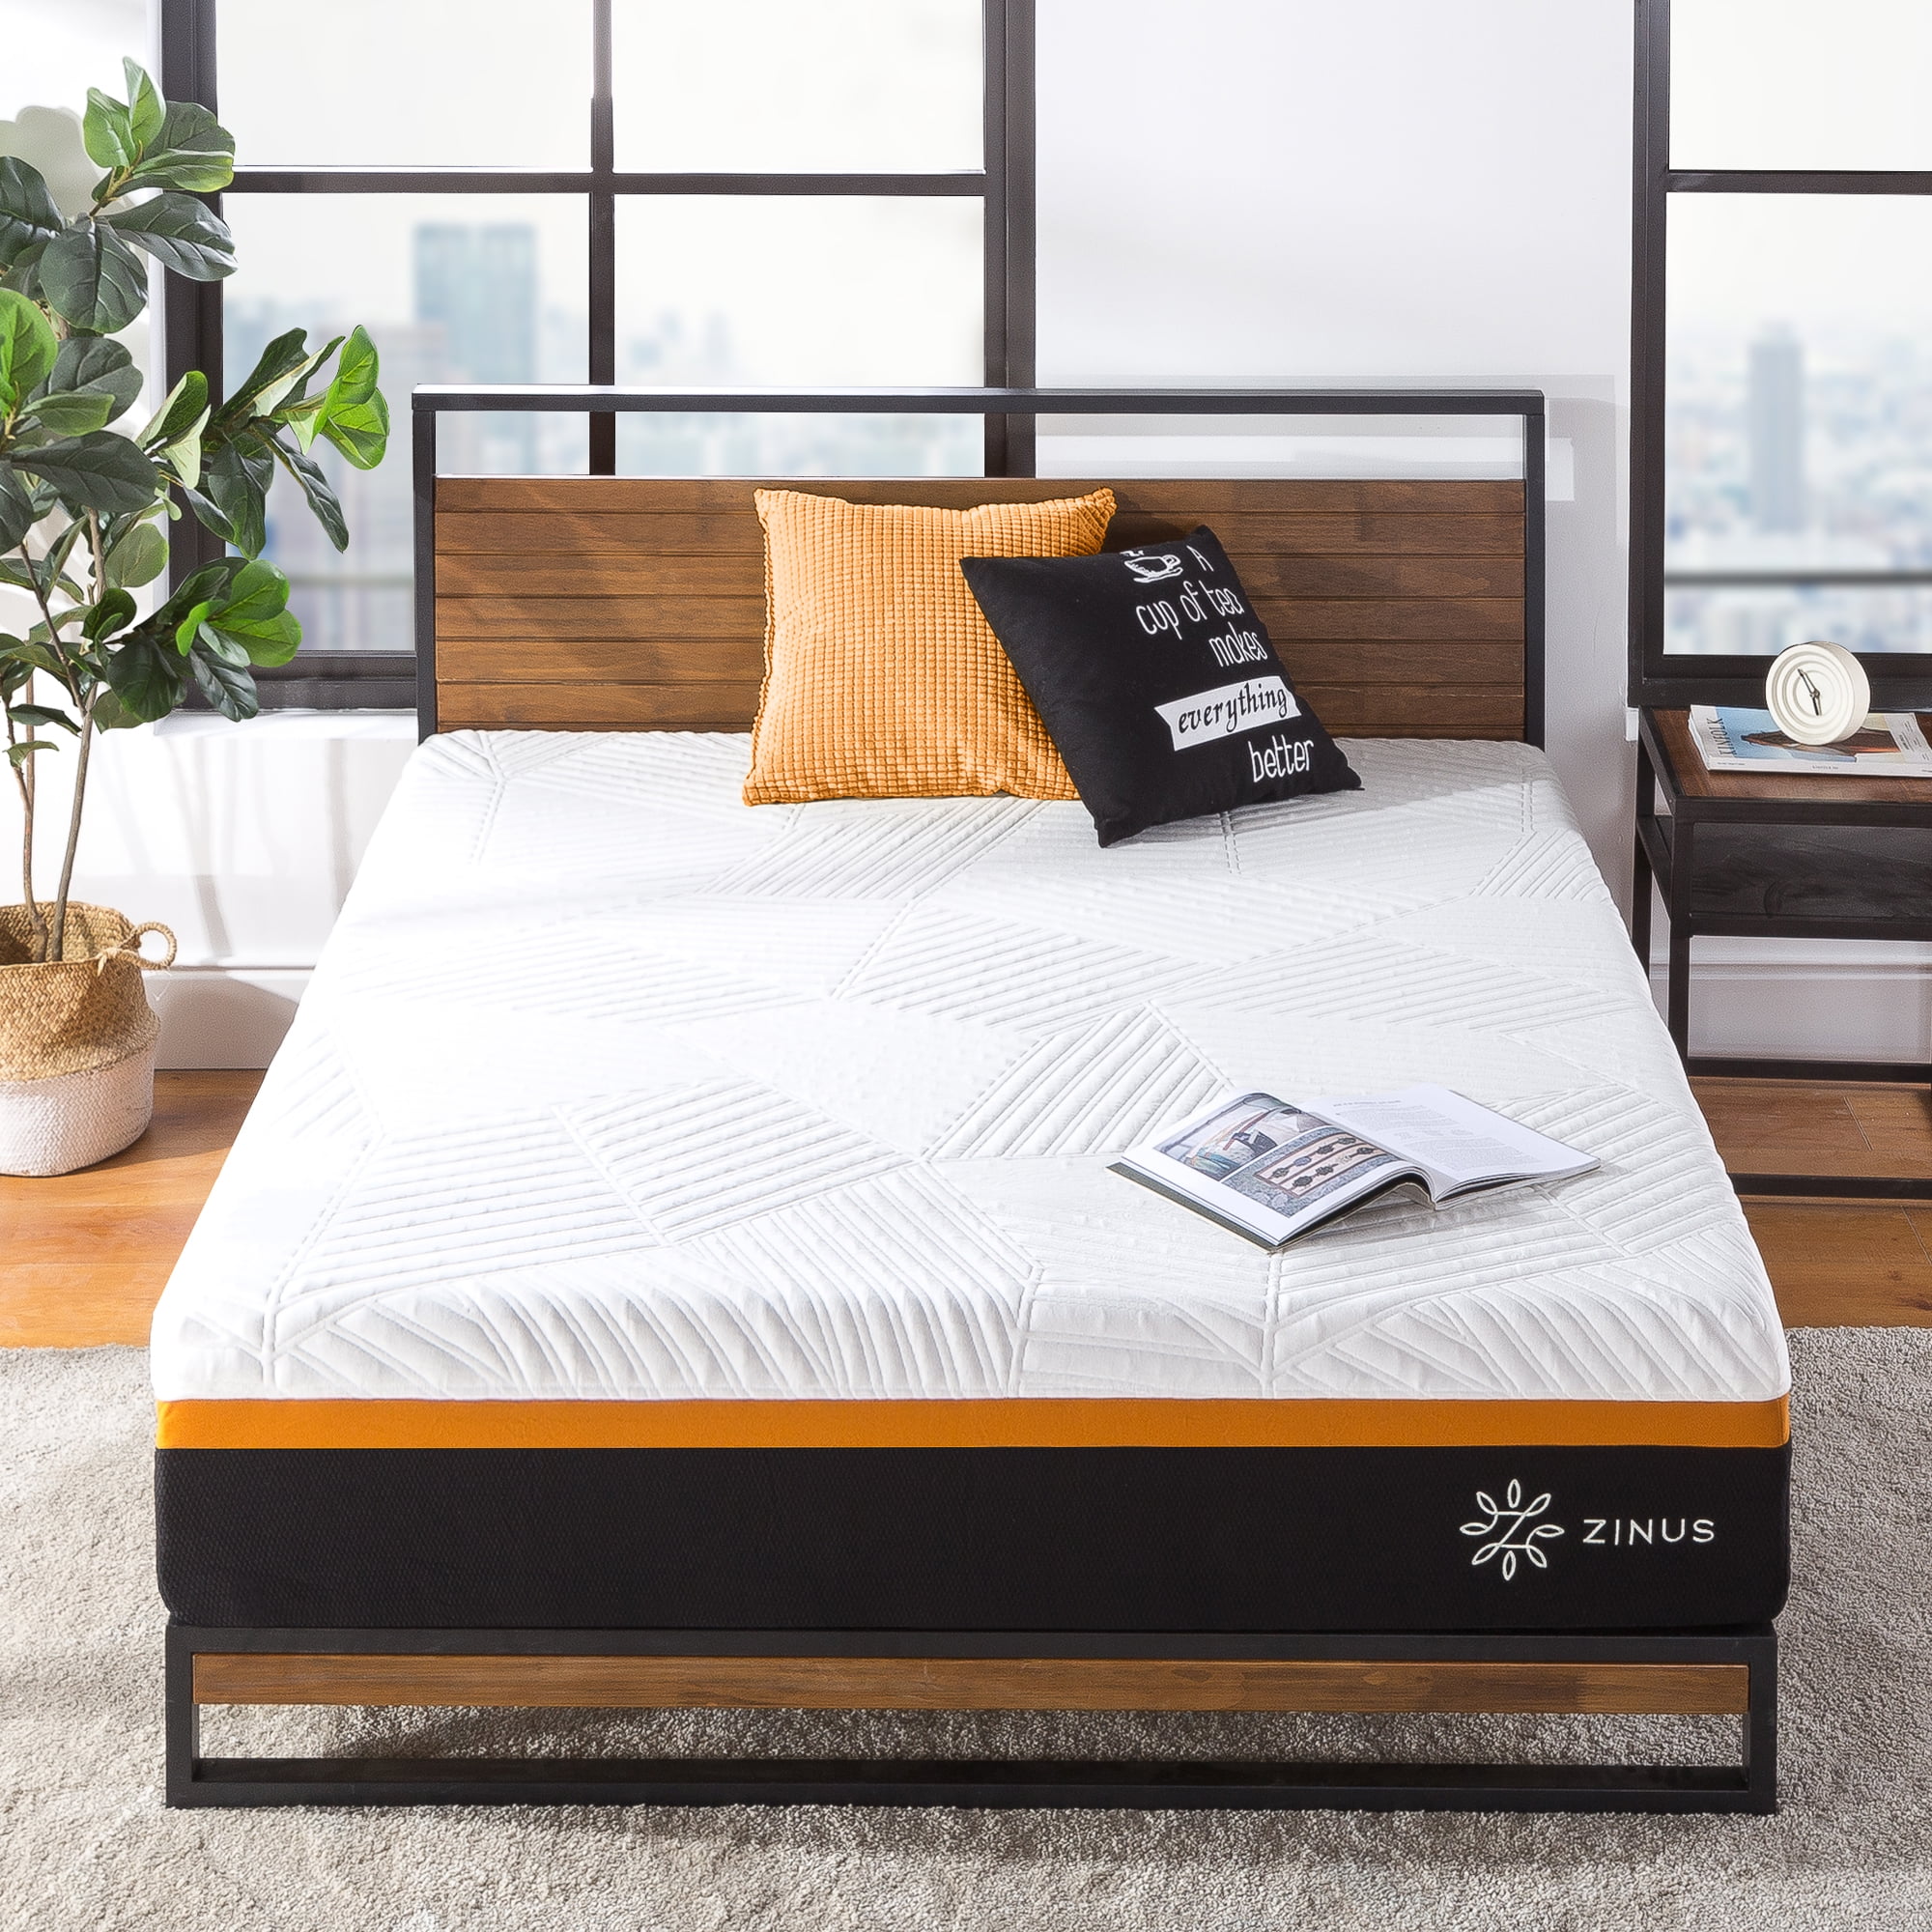 Photo 1 of Zinus 12 Cooling Copper Adaptive Hybrid Mattress with Innersprings for Motion Isolation, Queen